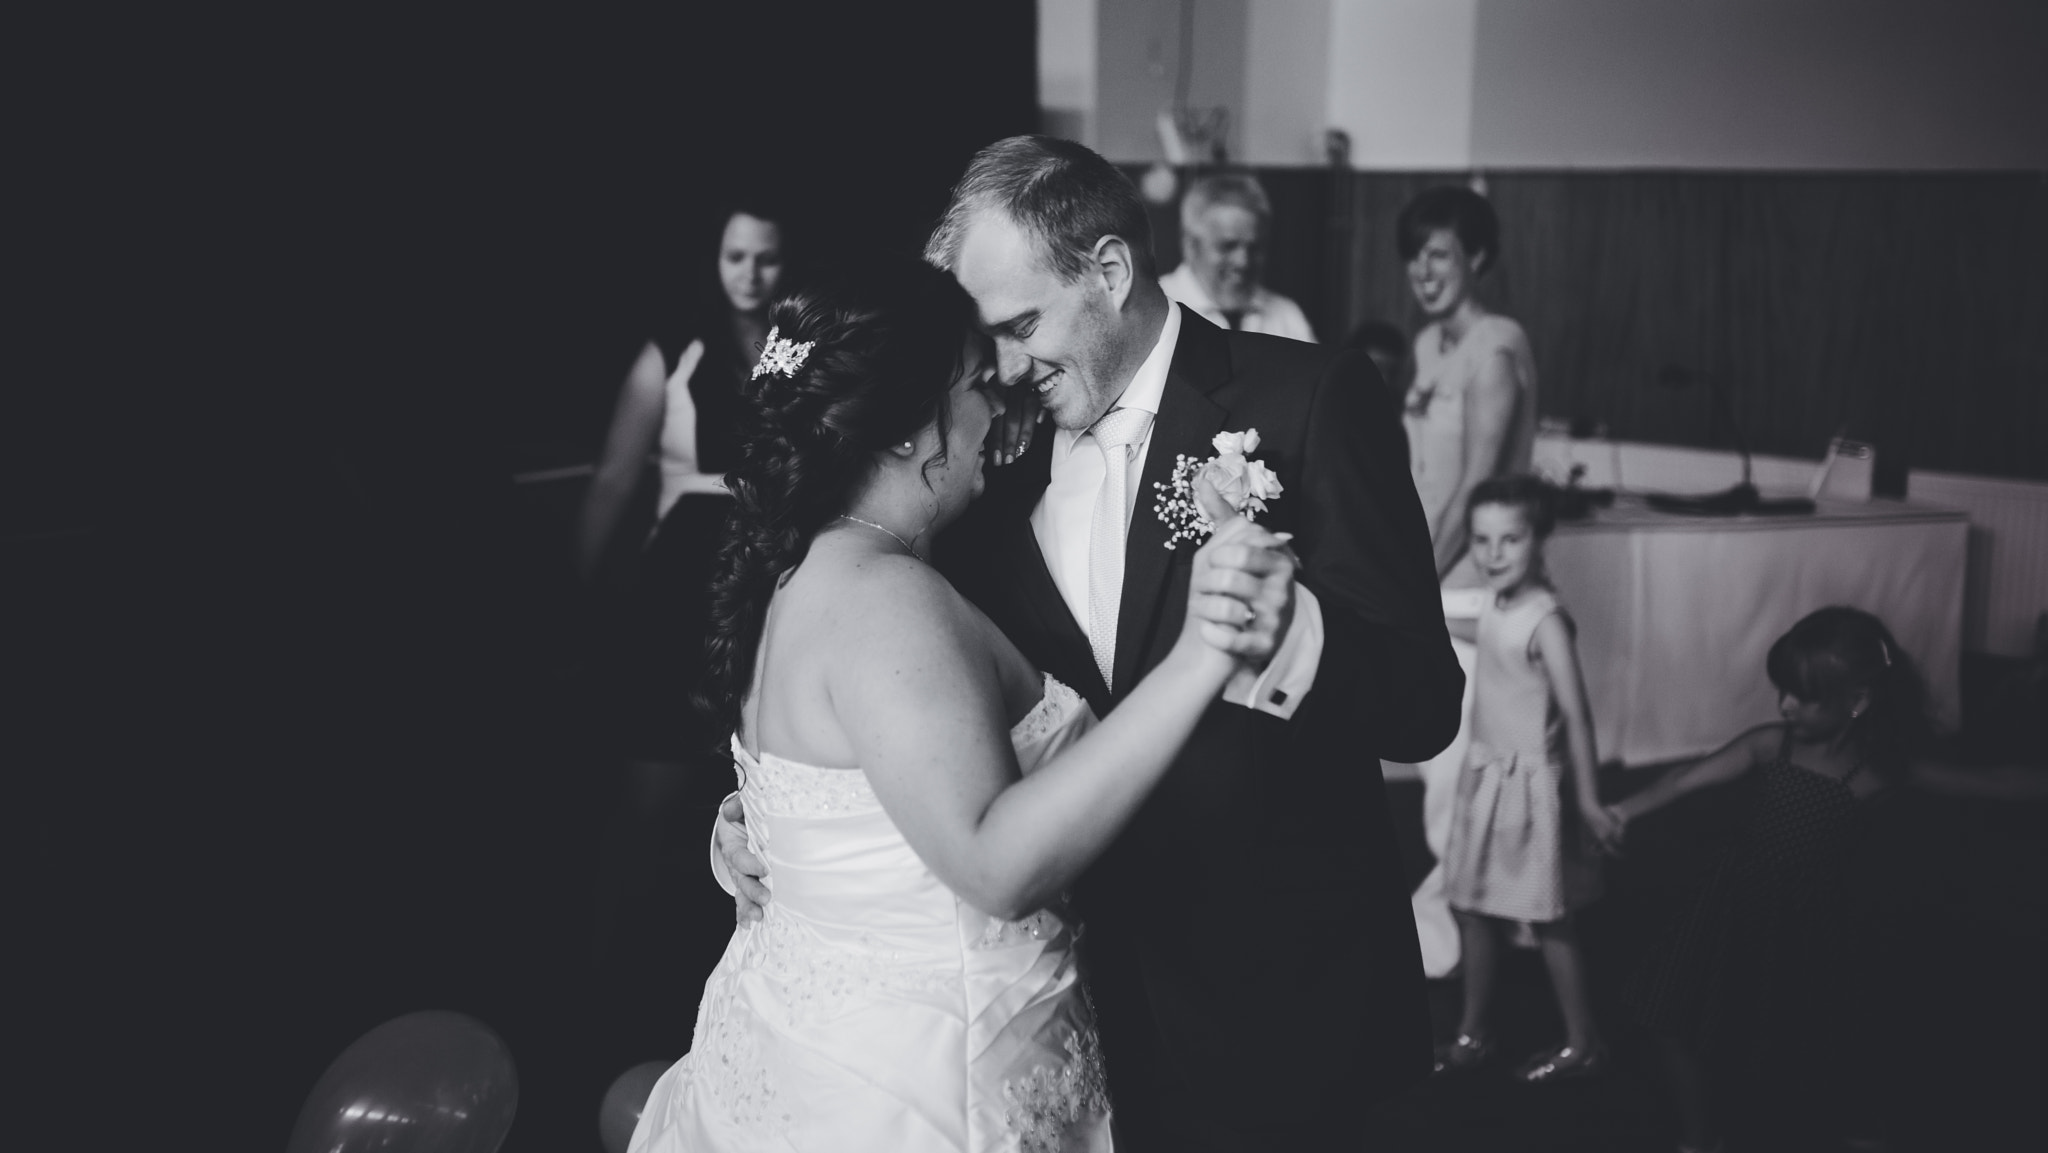 Sony a99 II sample photo. Their first dance photography